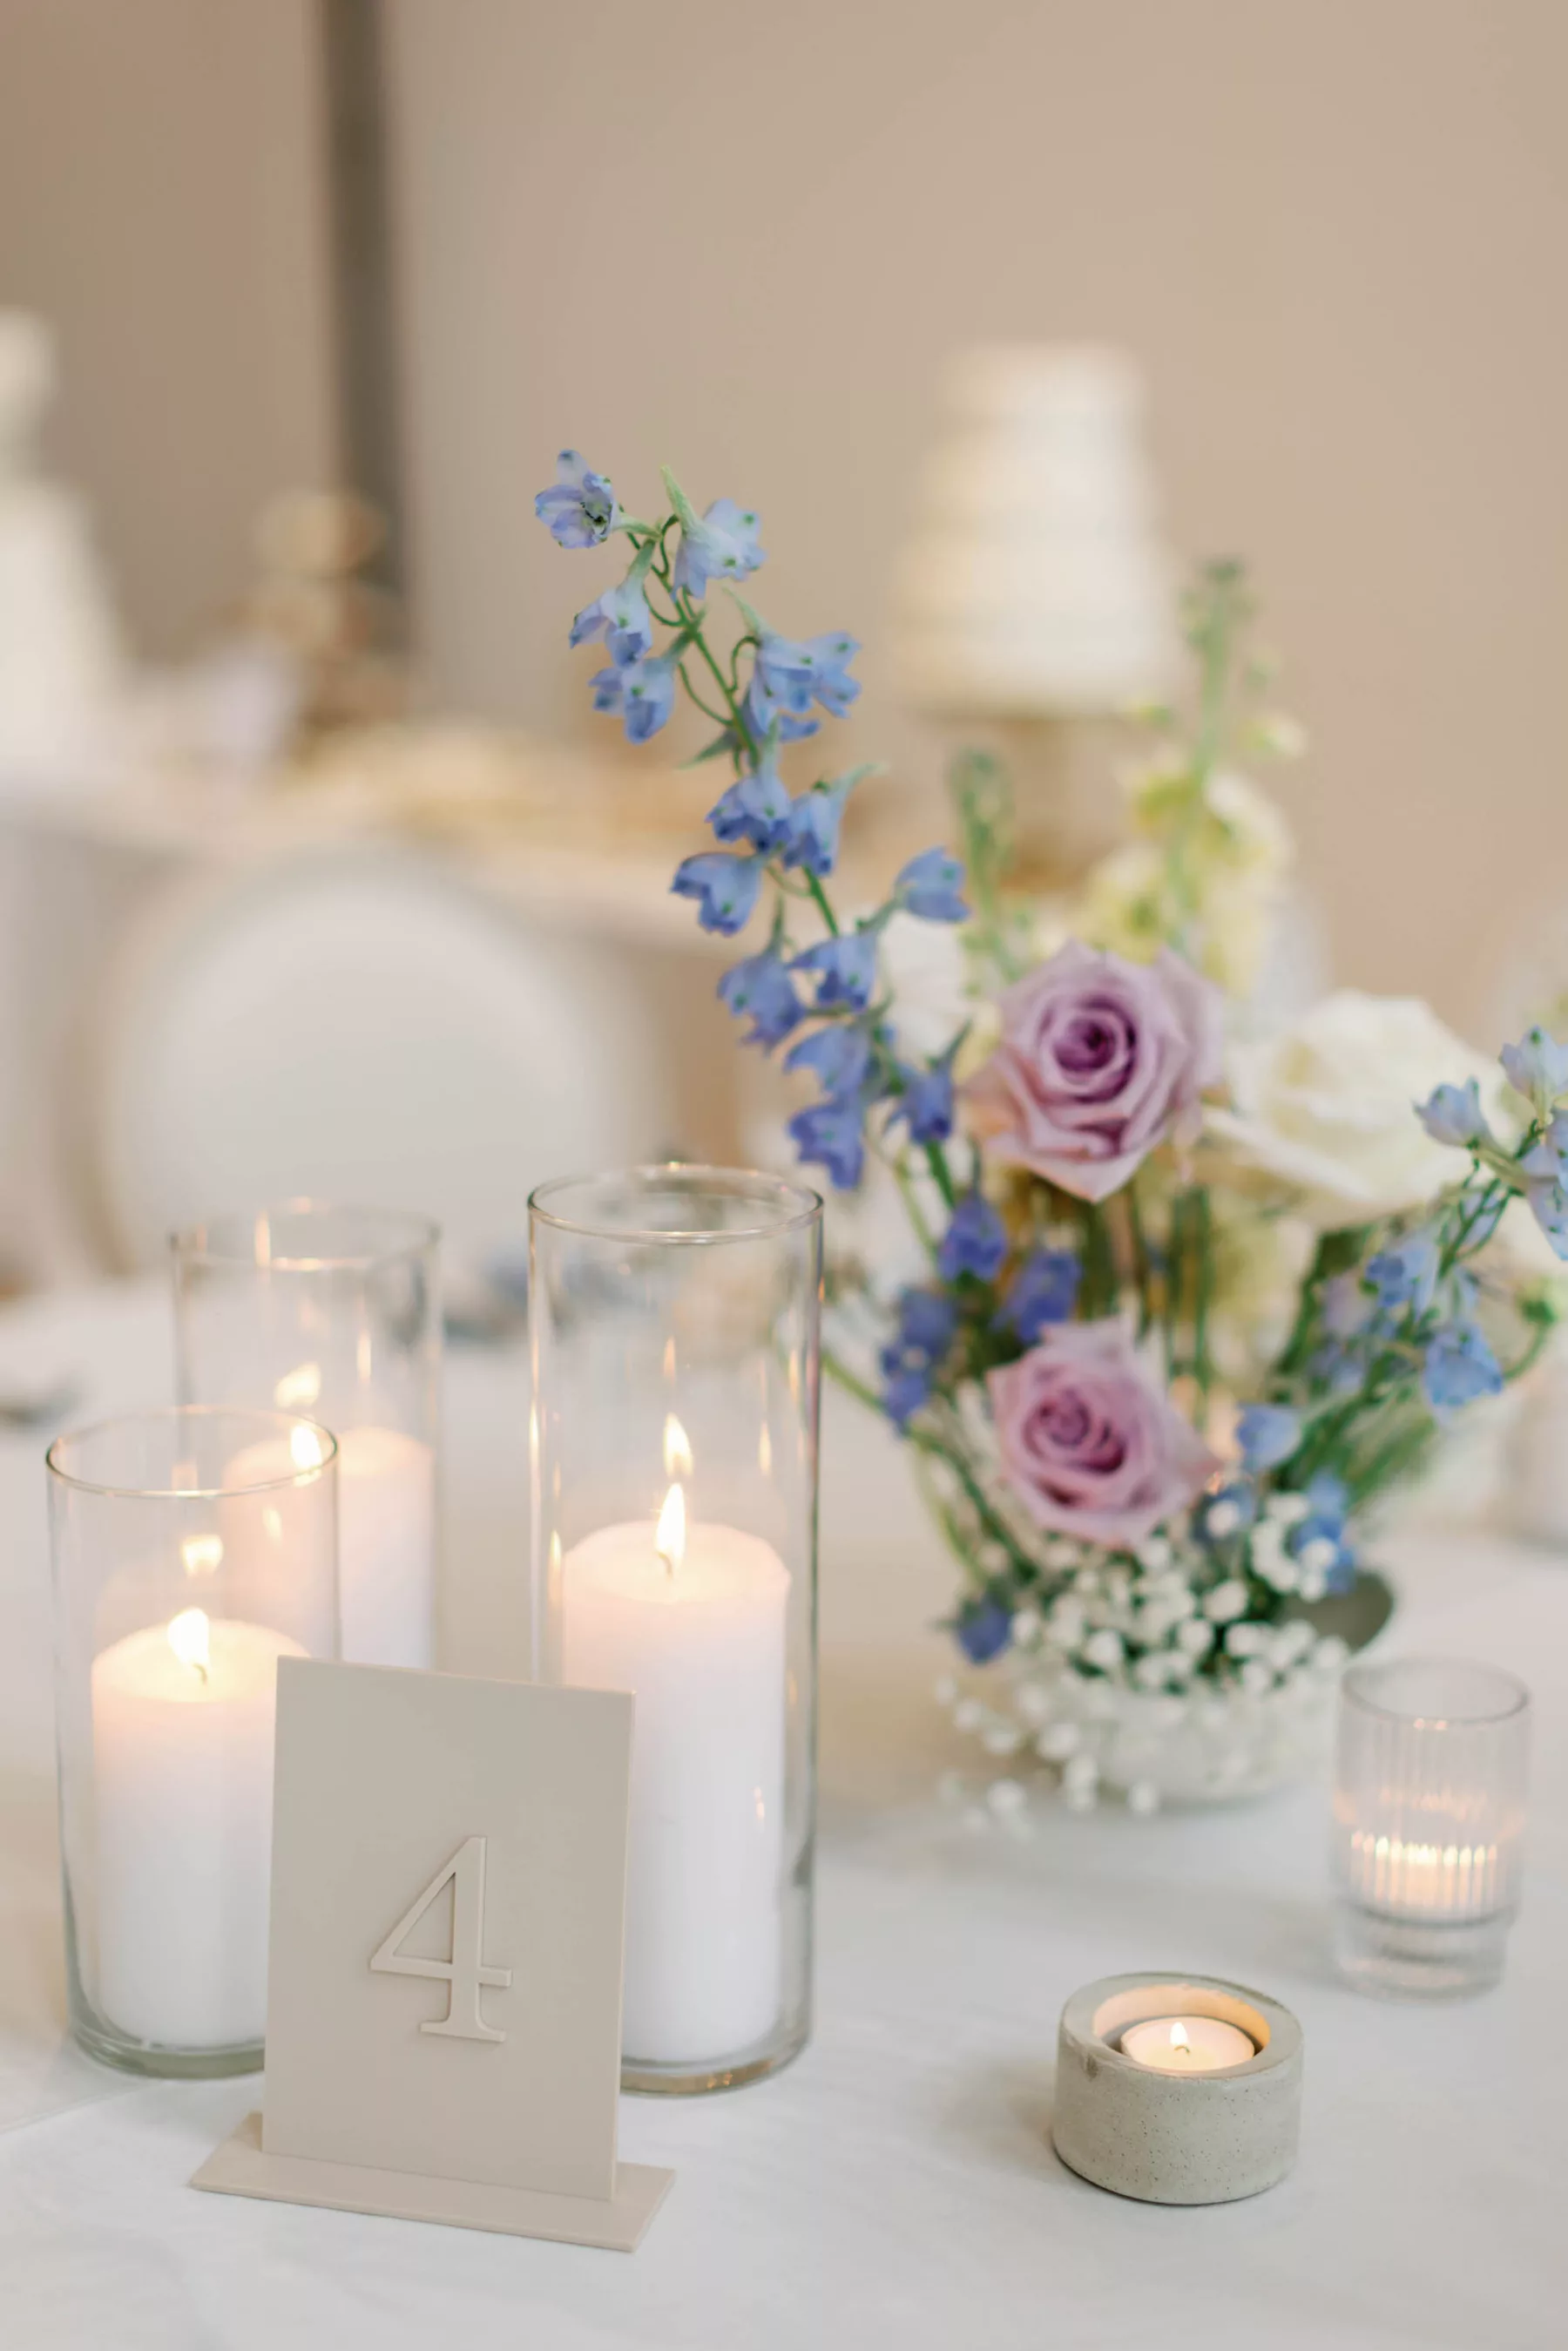 Whimsical Wedding Reception Decor Inspiration | Blue Lily of the Valley, Purple Roses, and White Baby's Breath and Candlelight Centerpiece Ideas